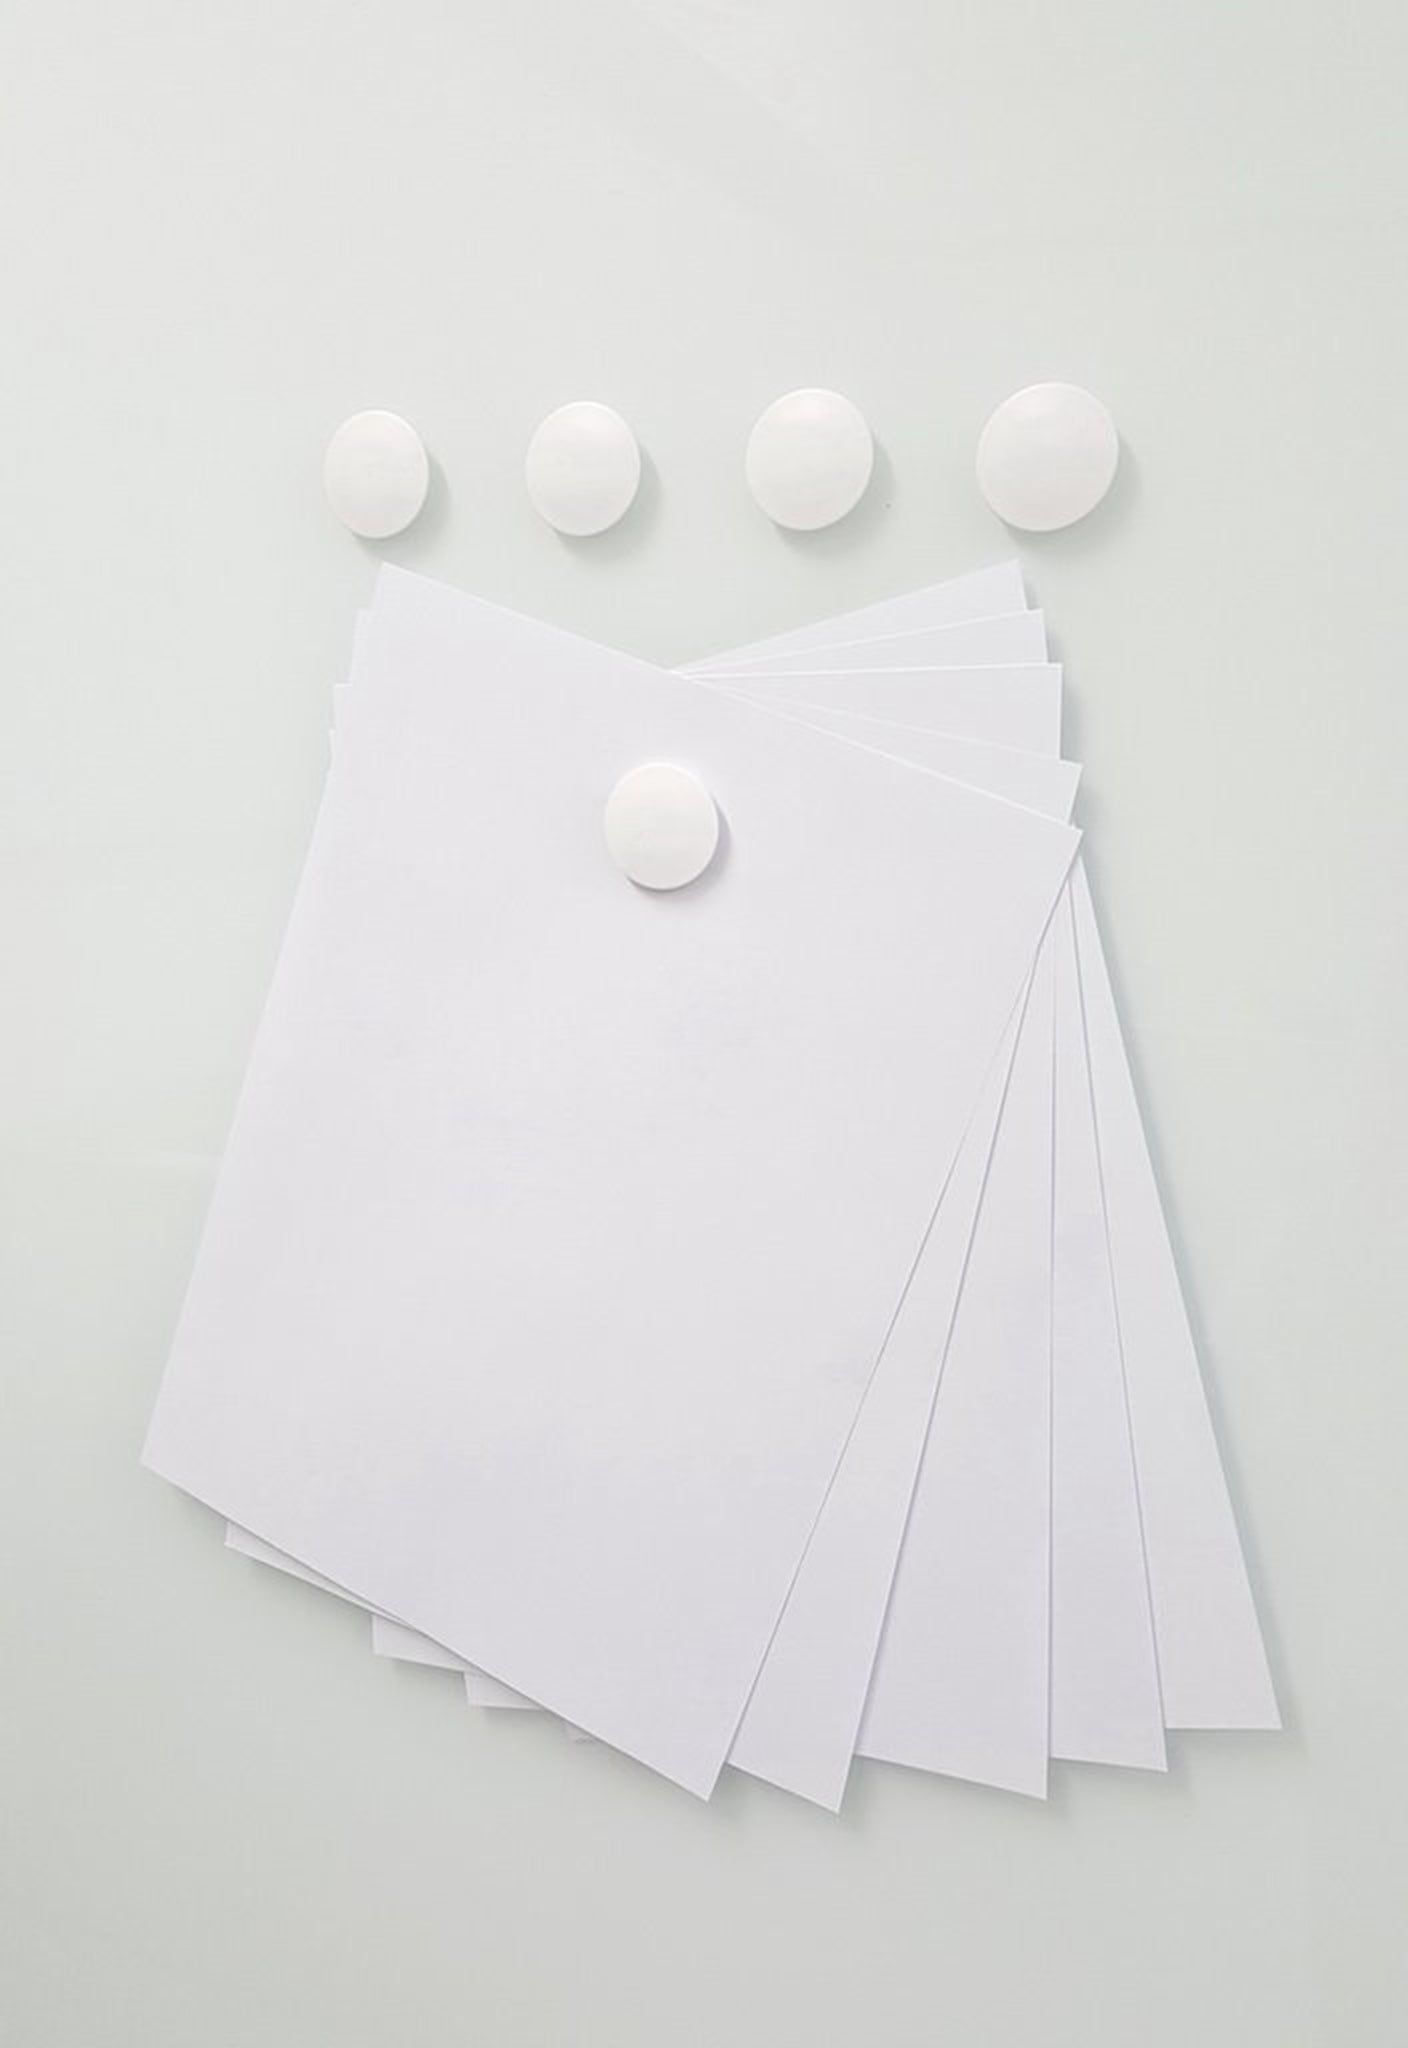 White Magnets for Audio-Visual Direct Magnetic Glass Dry-Erase Boards, Set  of 5